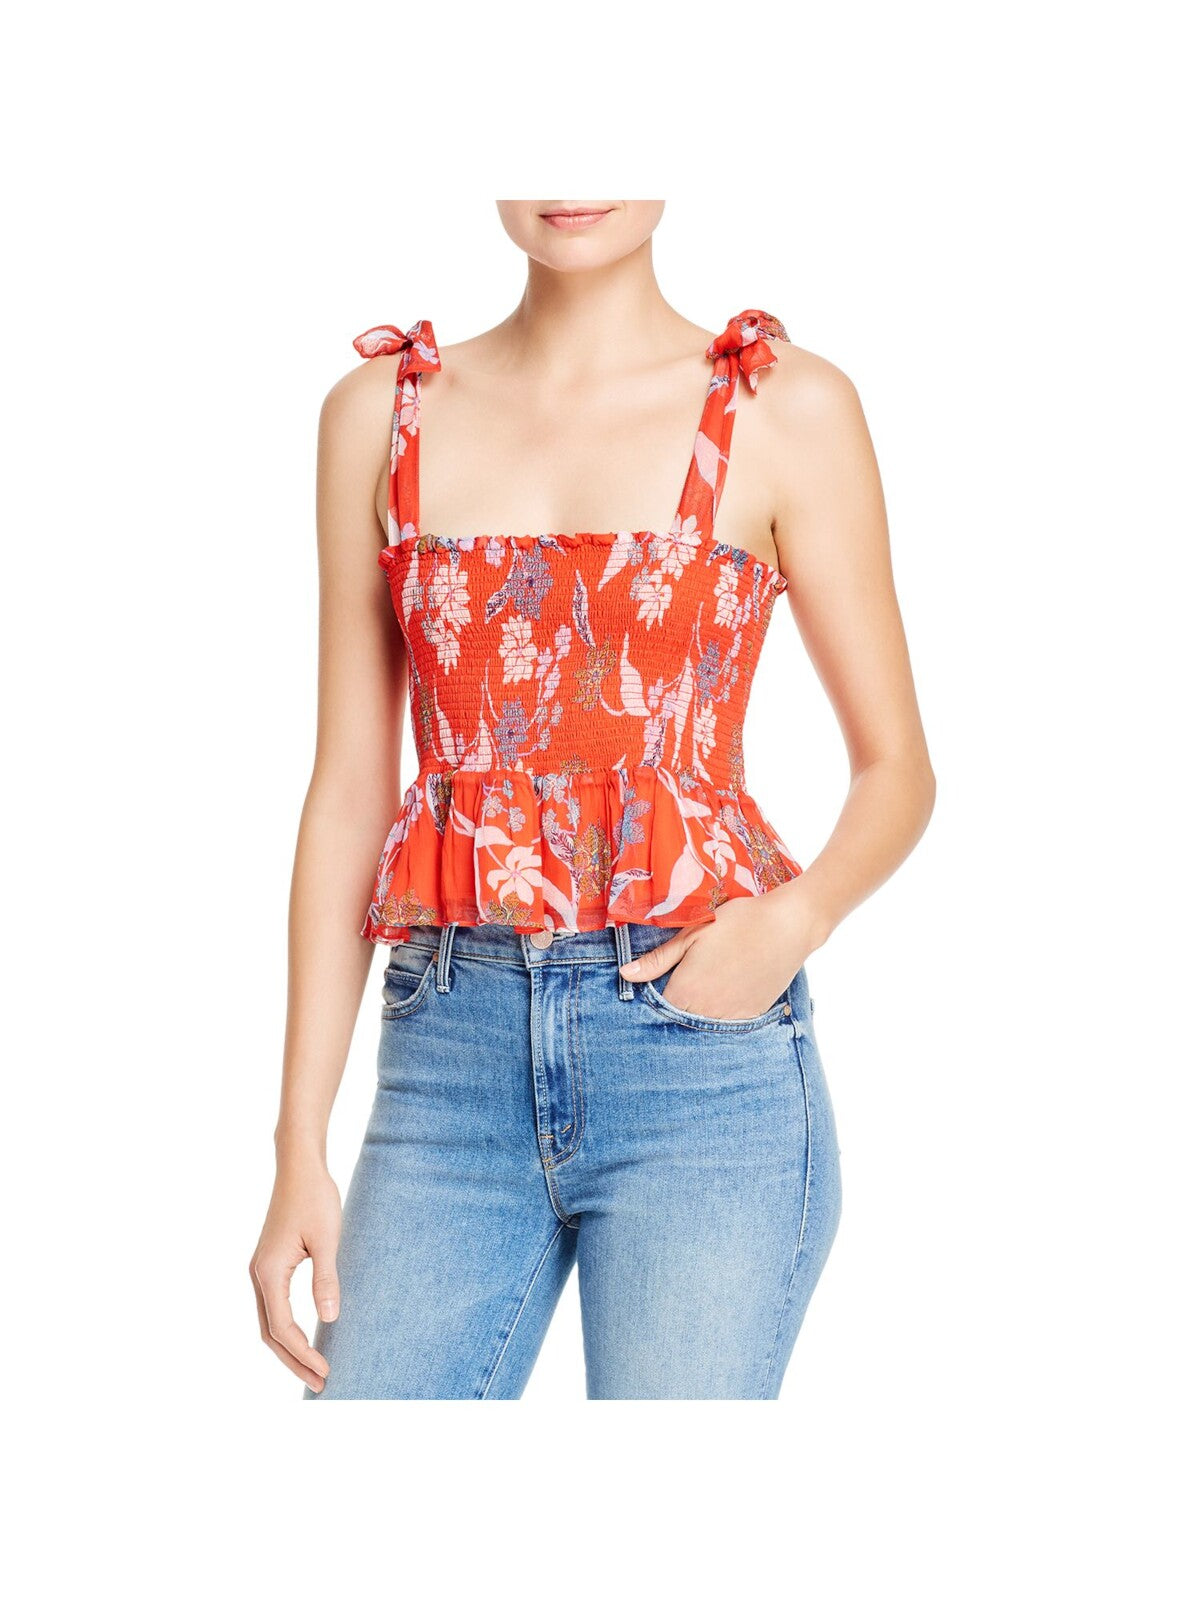 DOLAN Womens Red Stretch Smocked Ruffled Pleated Tank Floral Sleeveless Square Neck Top M